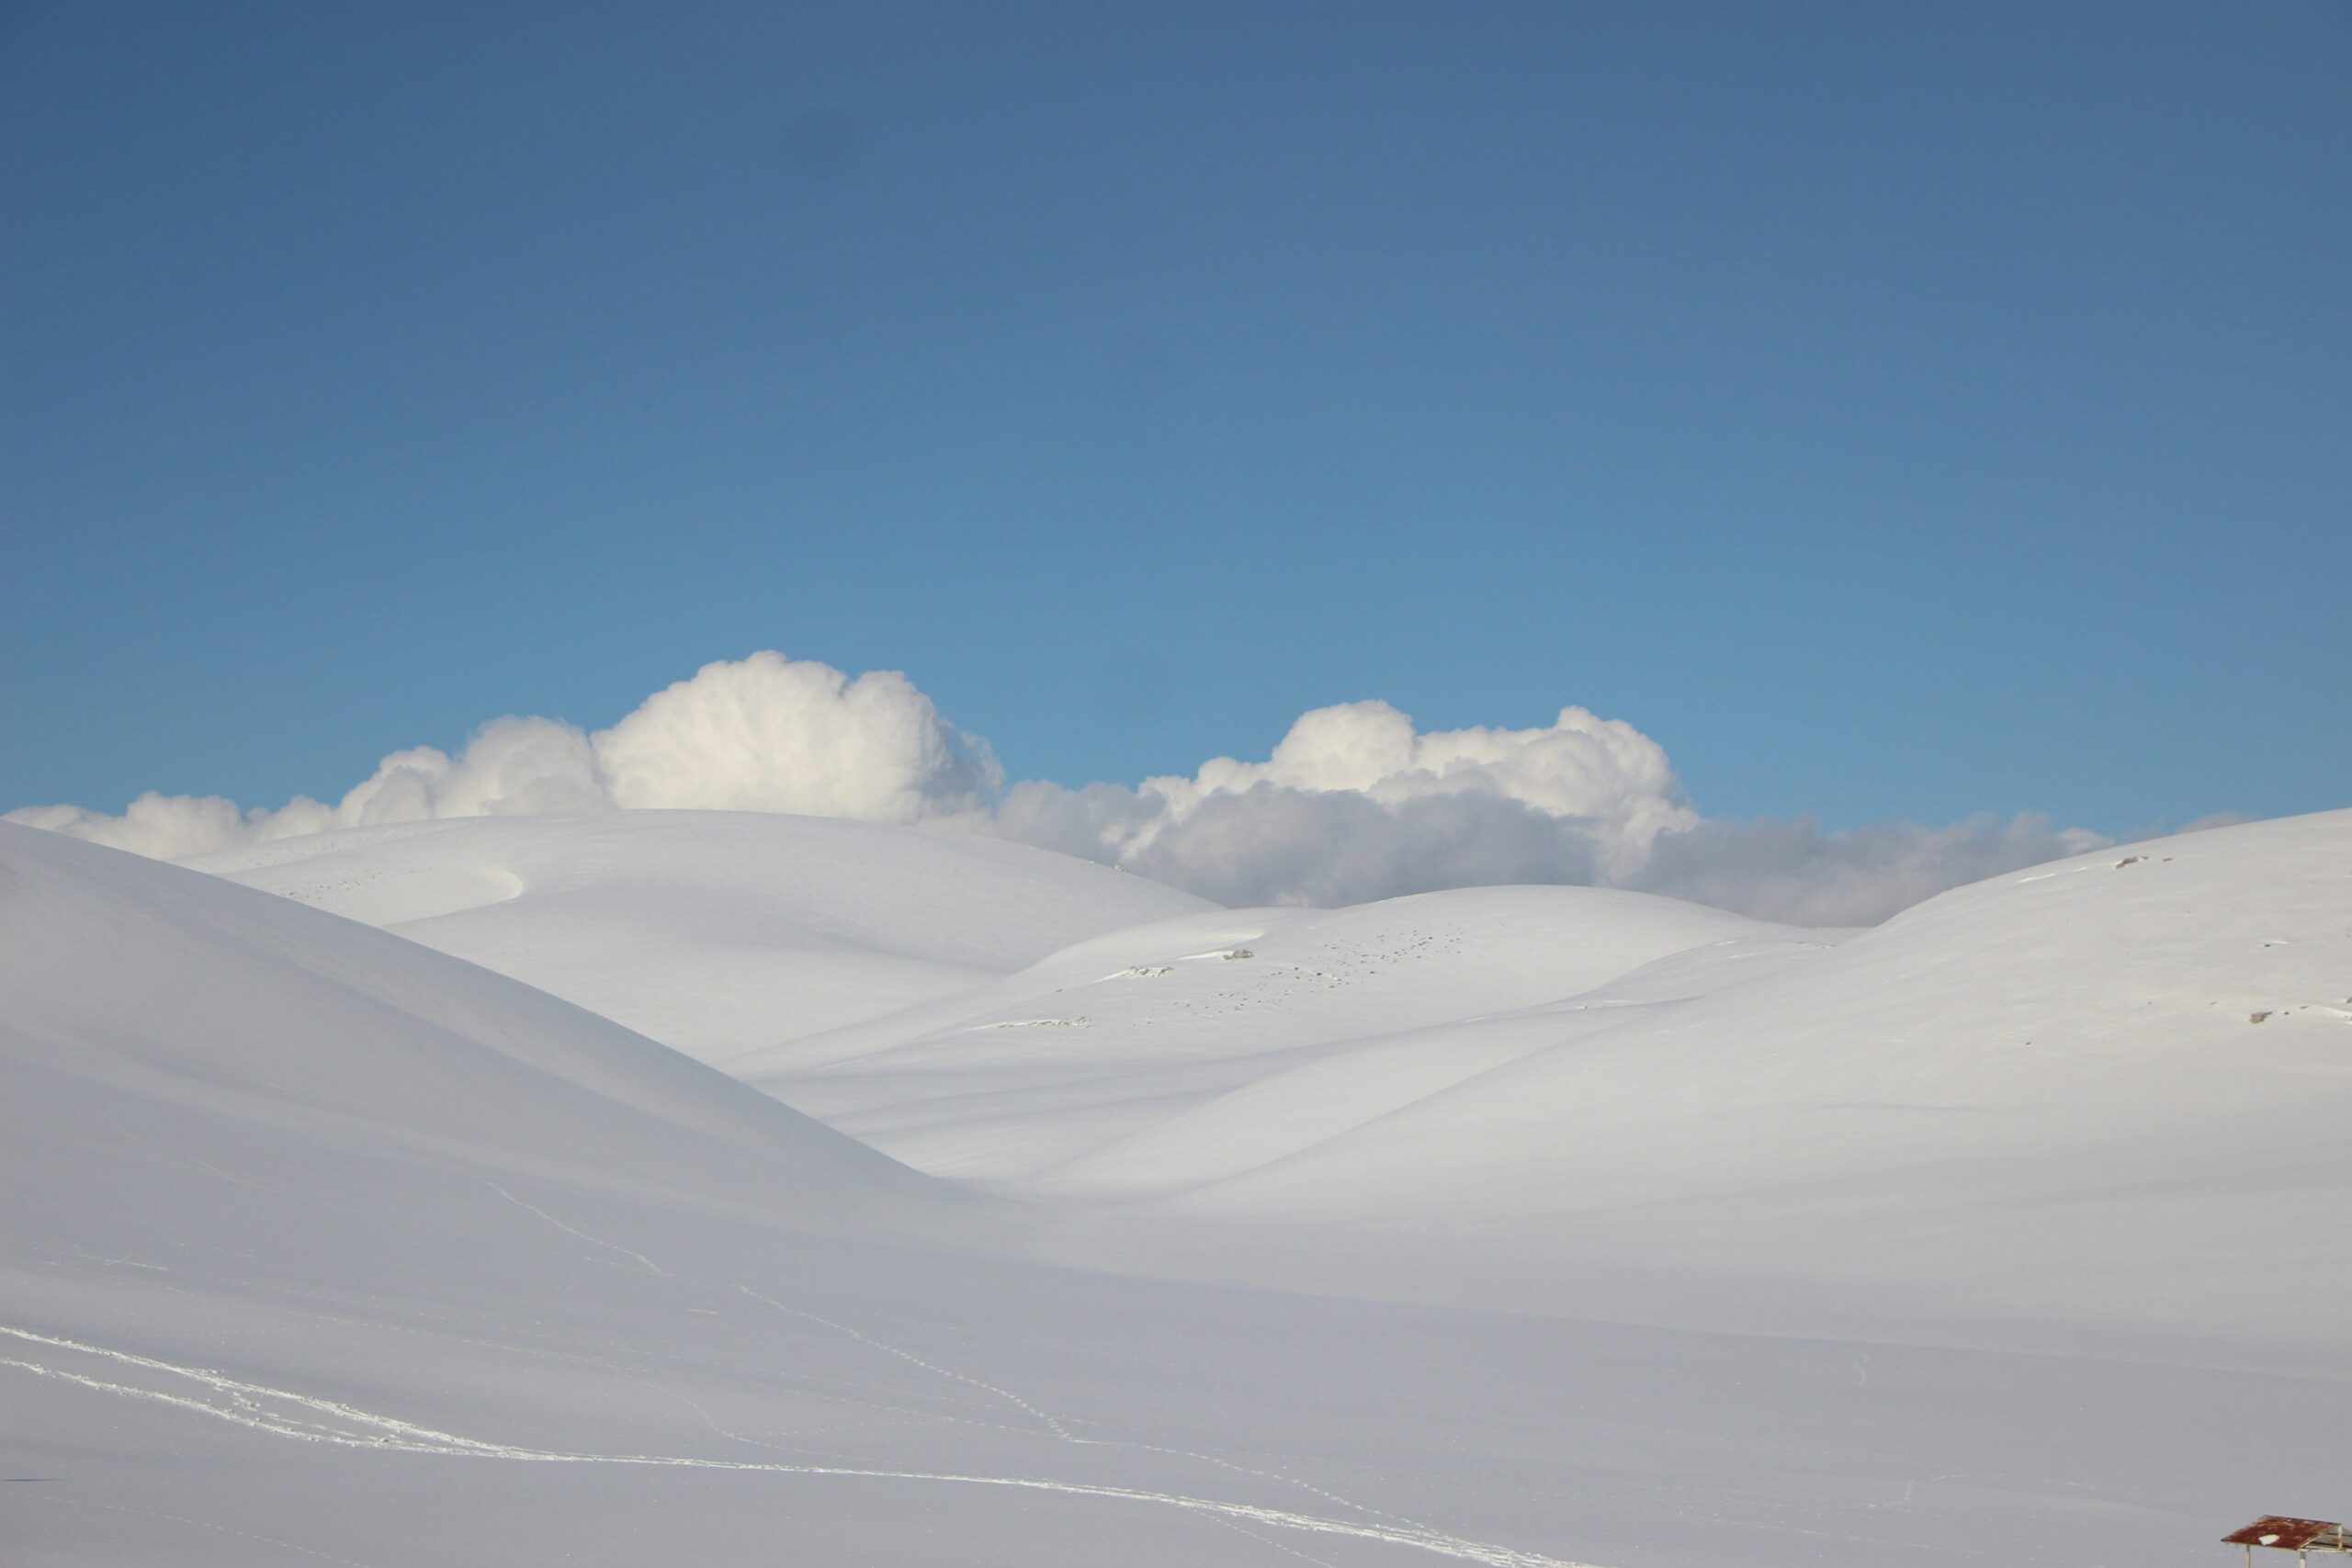 a person on skis in the snow with clouds in the background